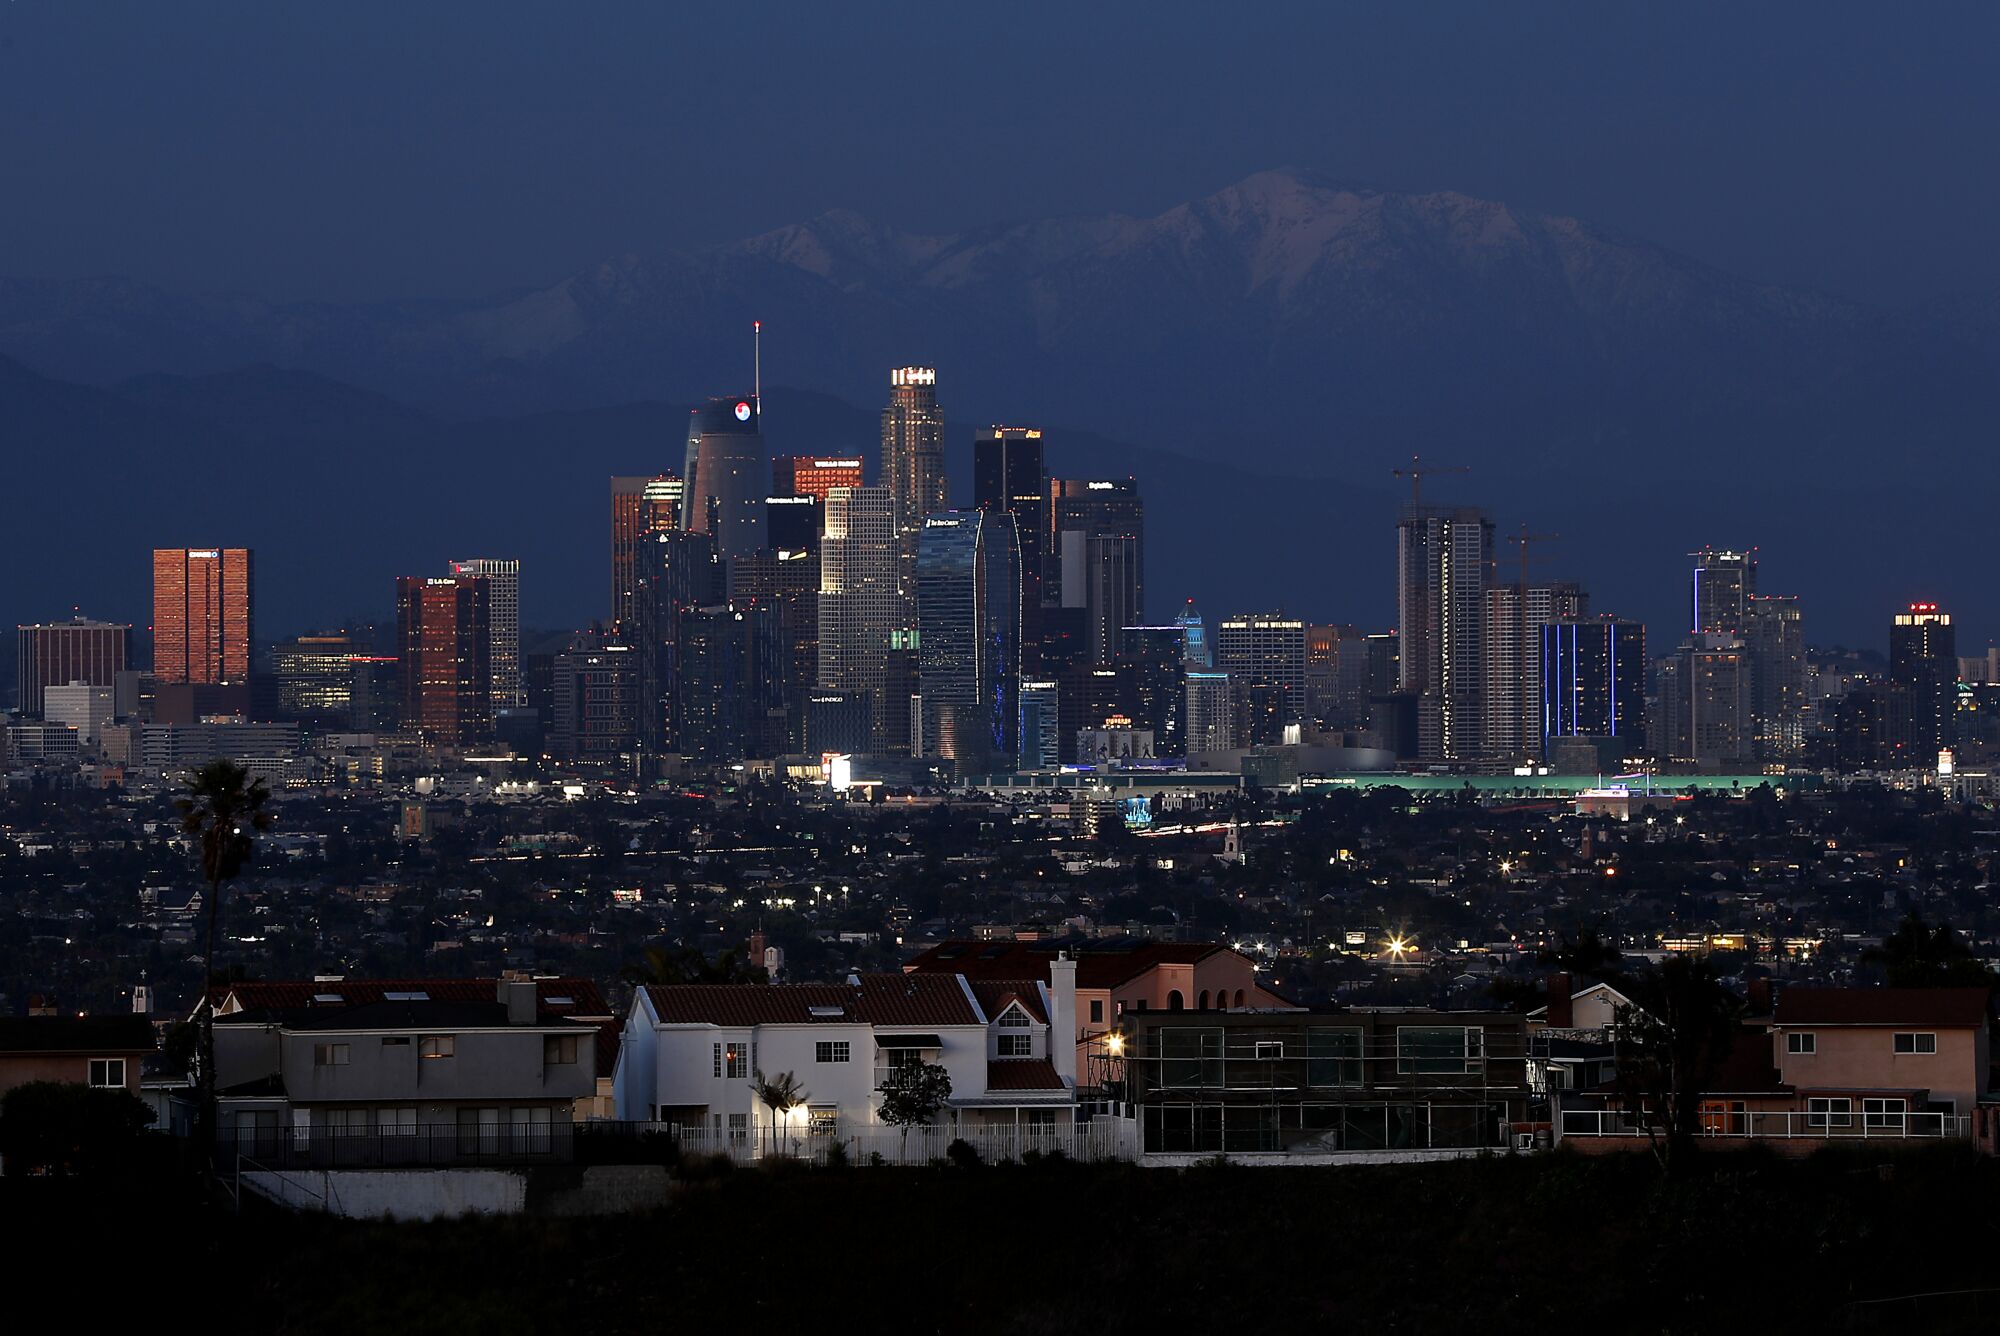 Dusk settles on downtown Los Angeles and the snow-capped Mt. Baldy. 